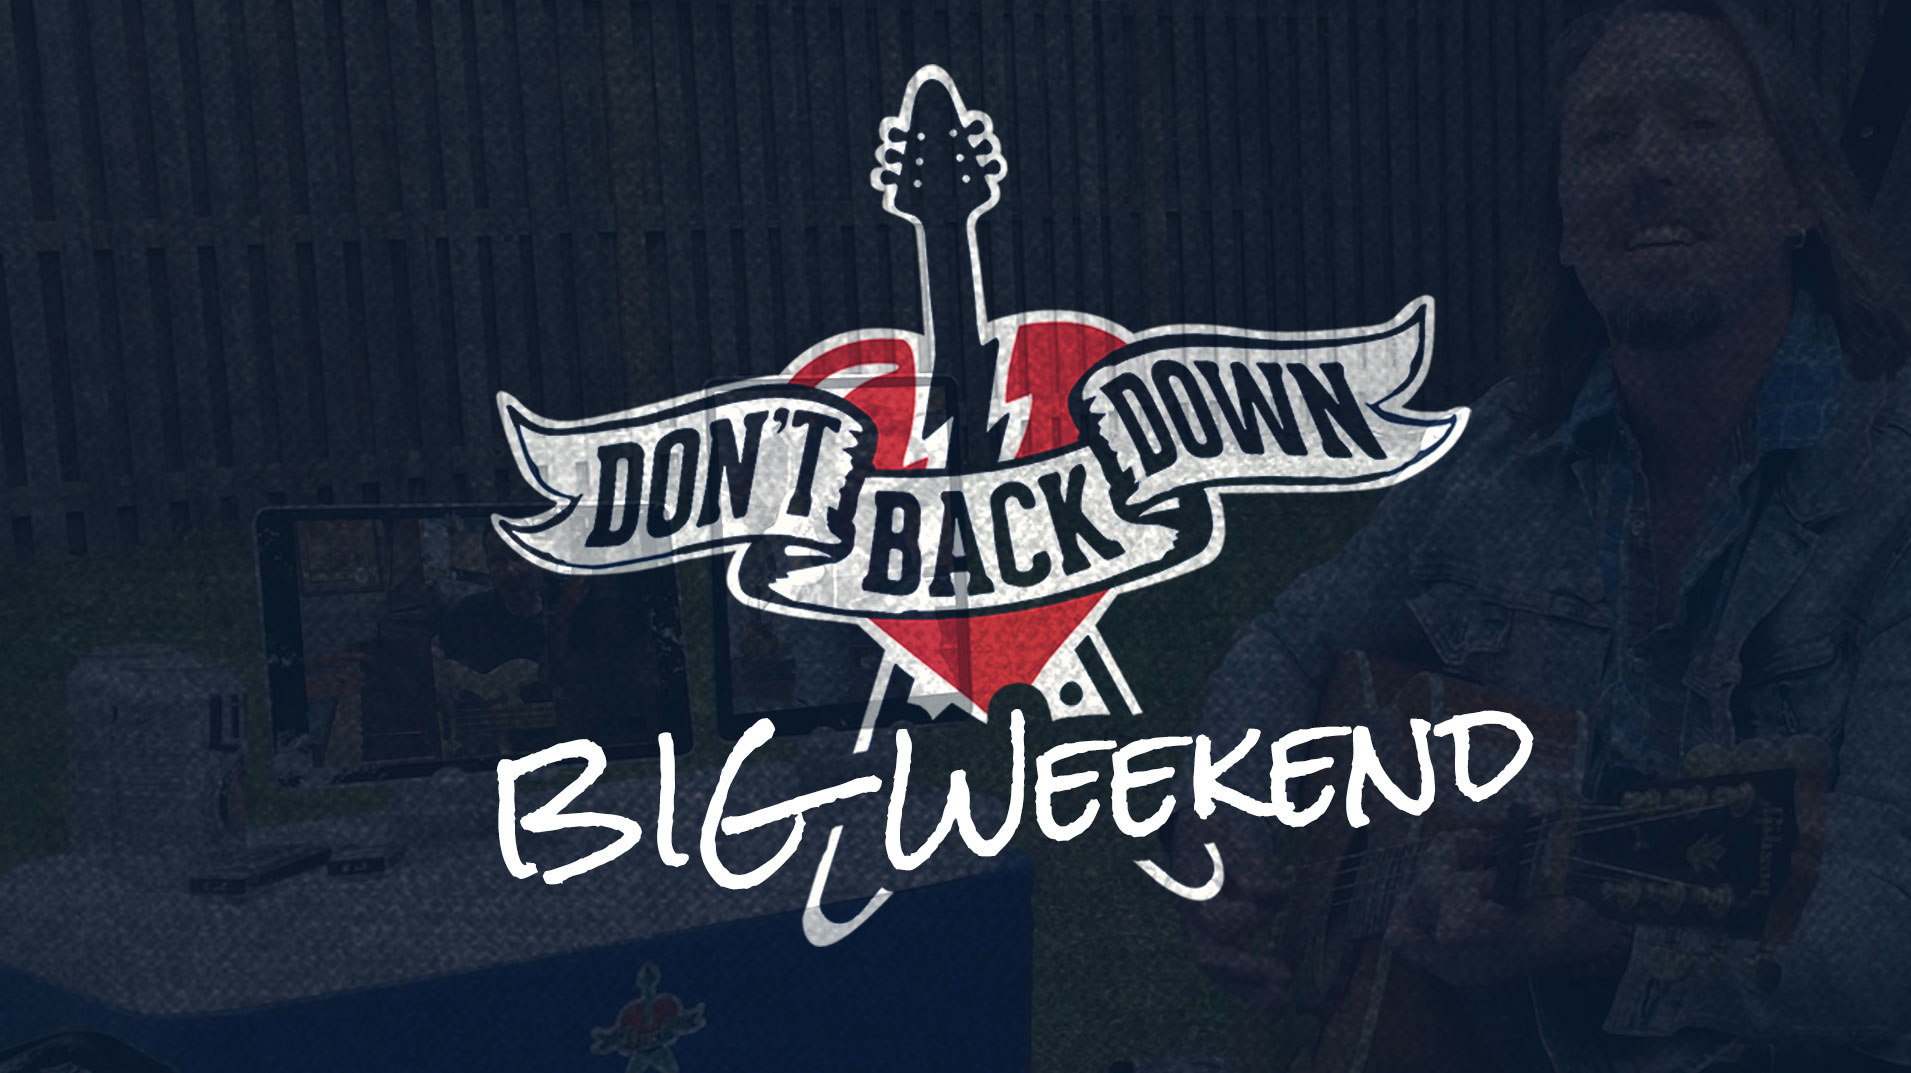 Don't Back Down, Maryland's premier Tom Petty and the Heartbreakers tribute band presents a video tribute to Tom Petty’s Big Weekend. Mark O’Dell Chris Huntington, John Nichols, Tom Sabia, Mike Ward, Evan Cooper